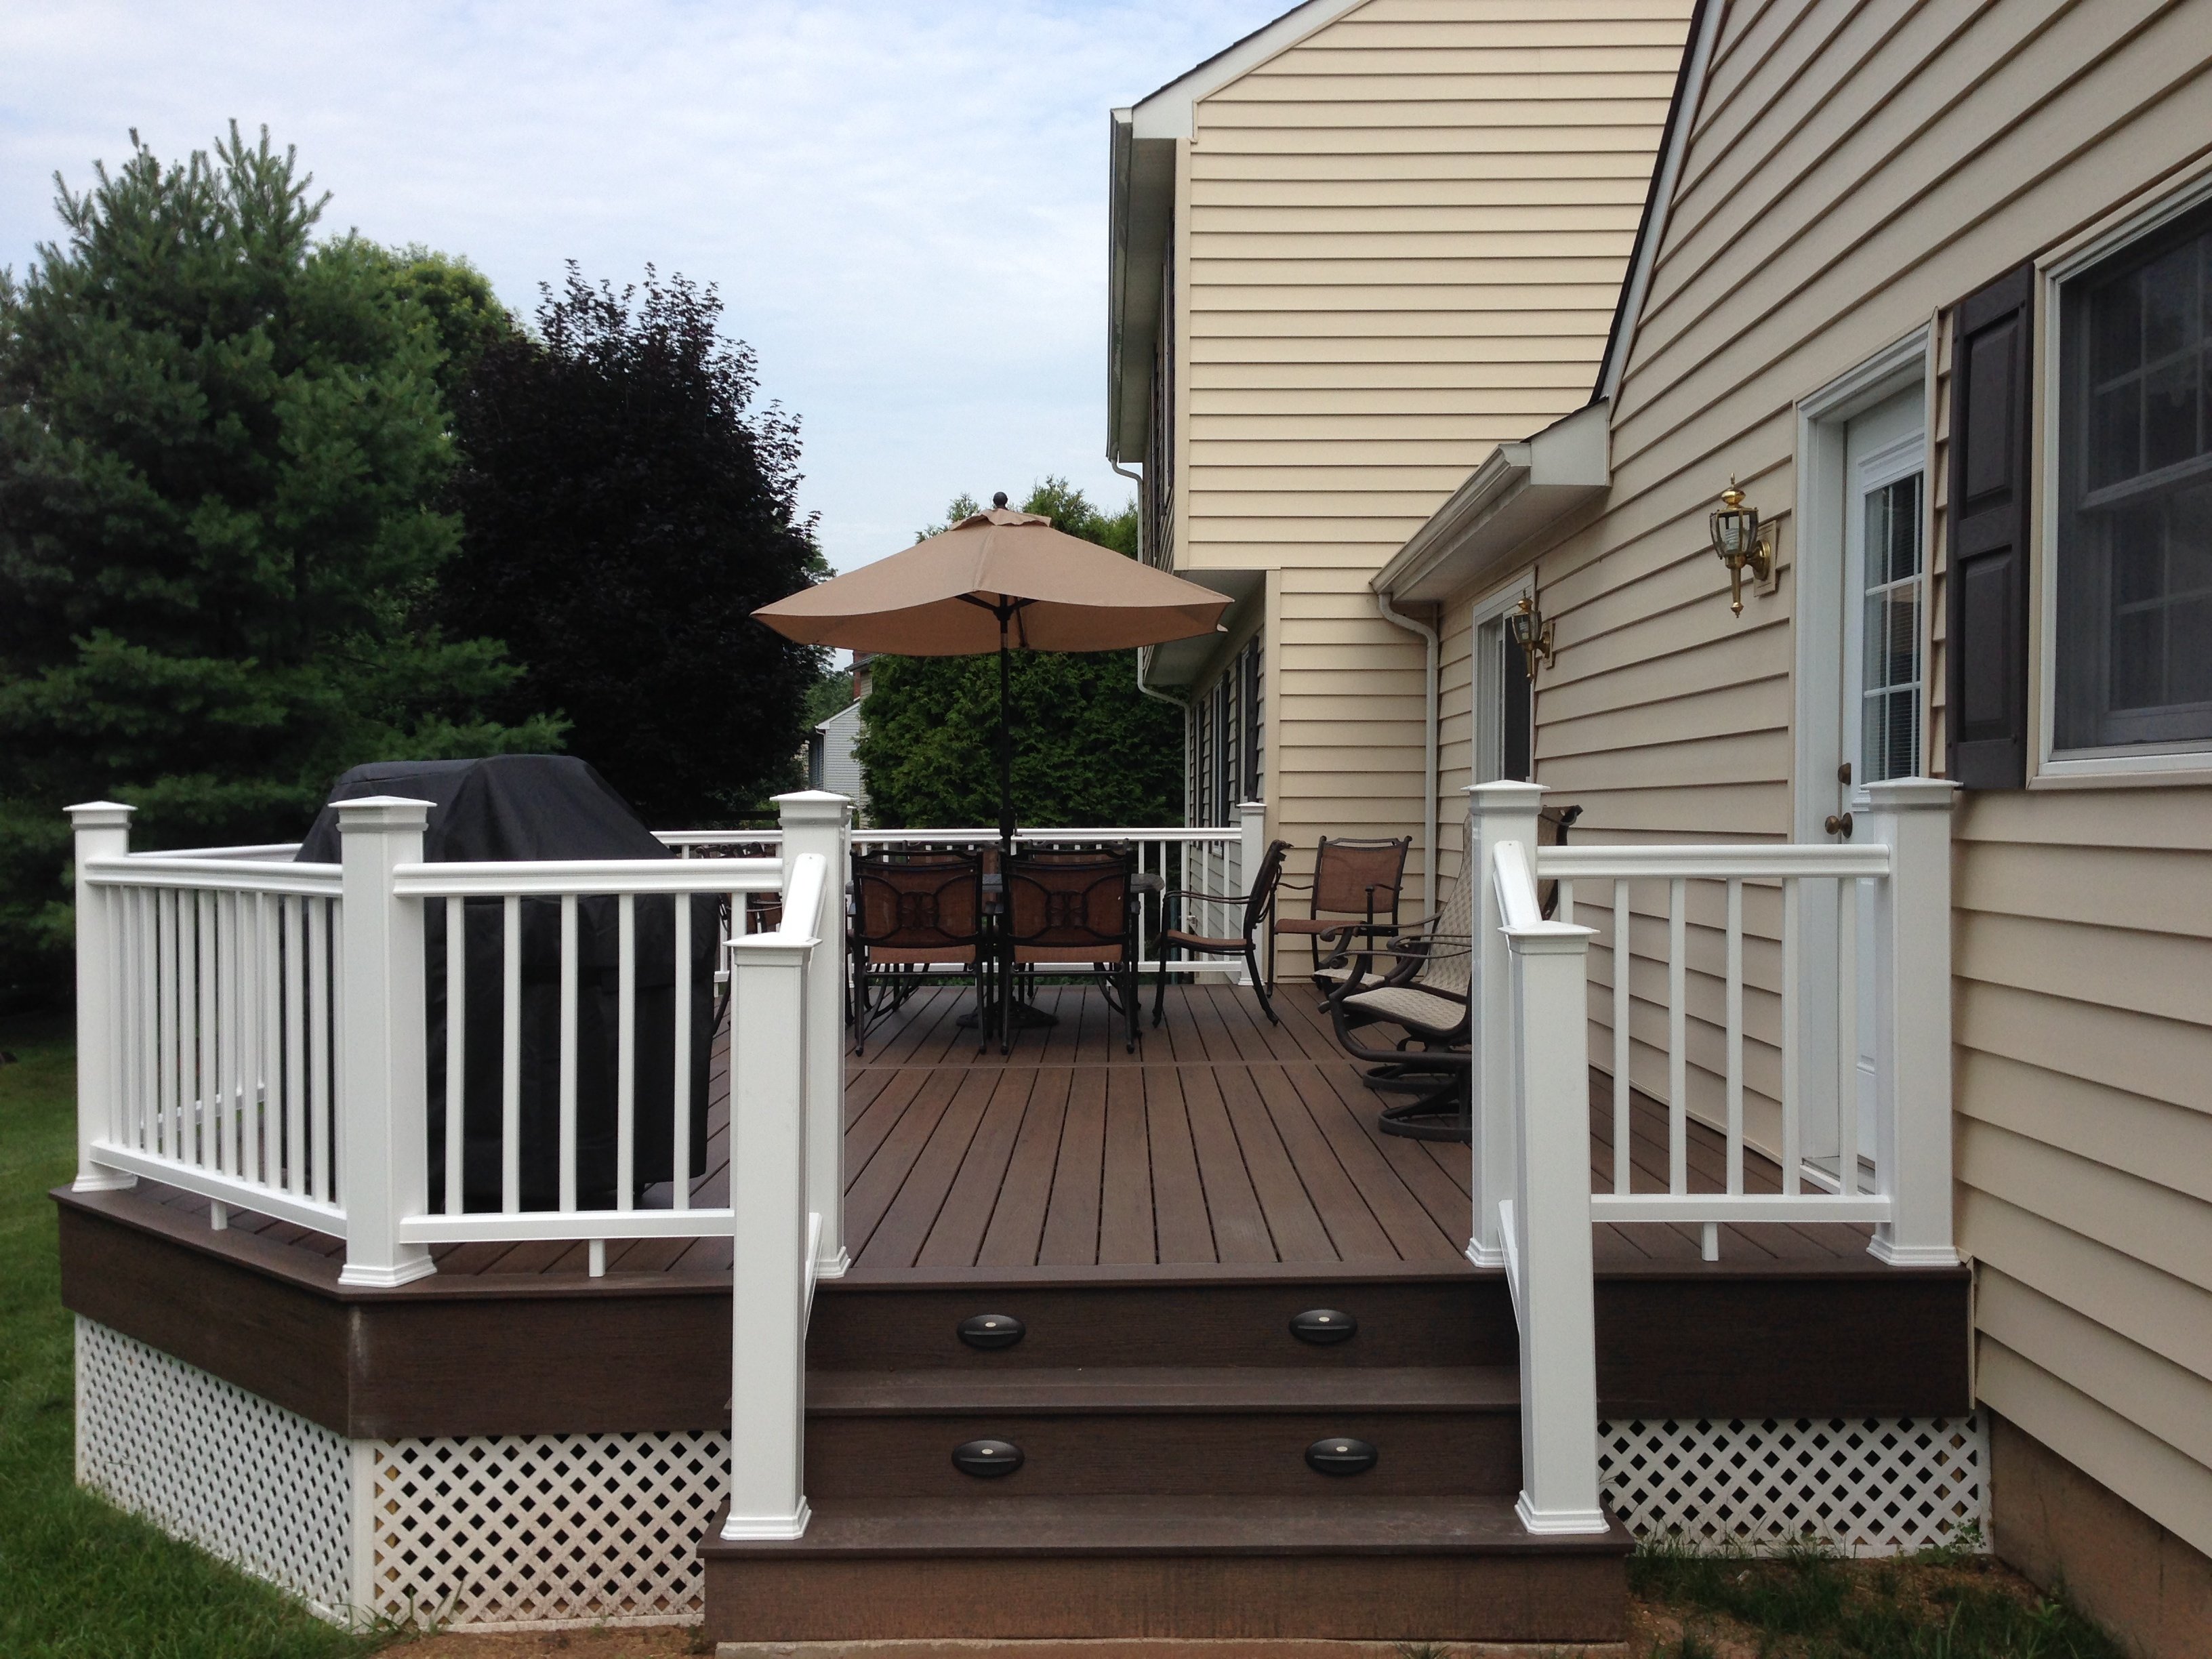 Deck vs Patio: What's the Best Option for You?